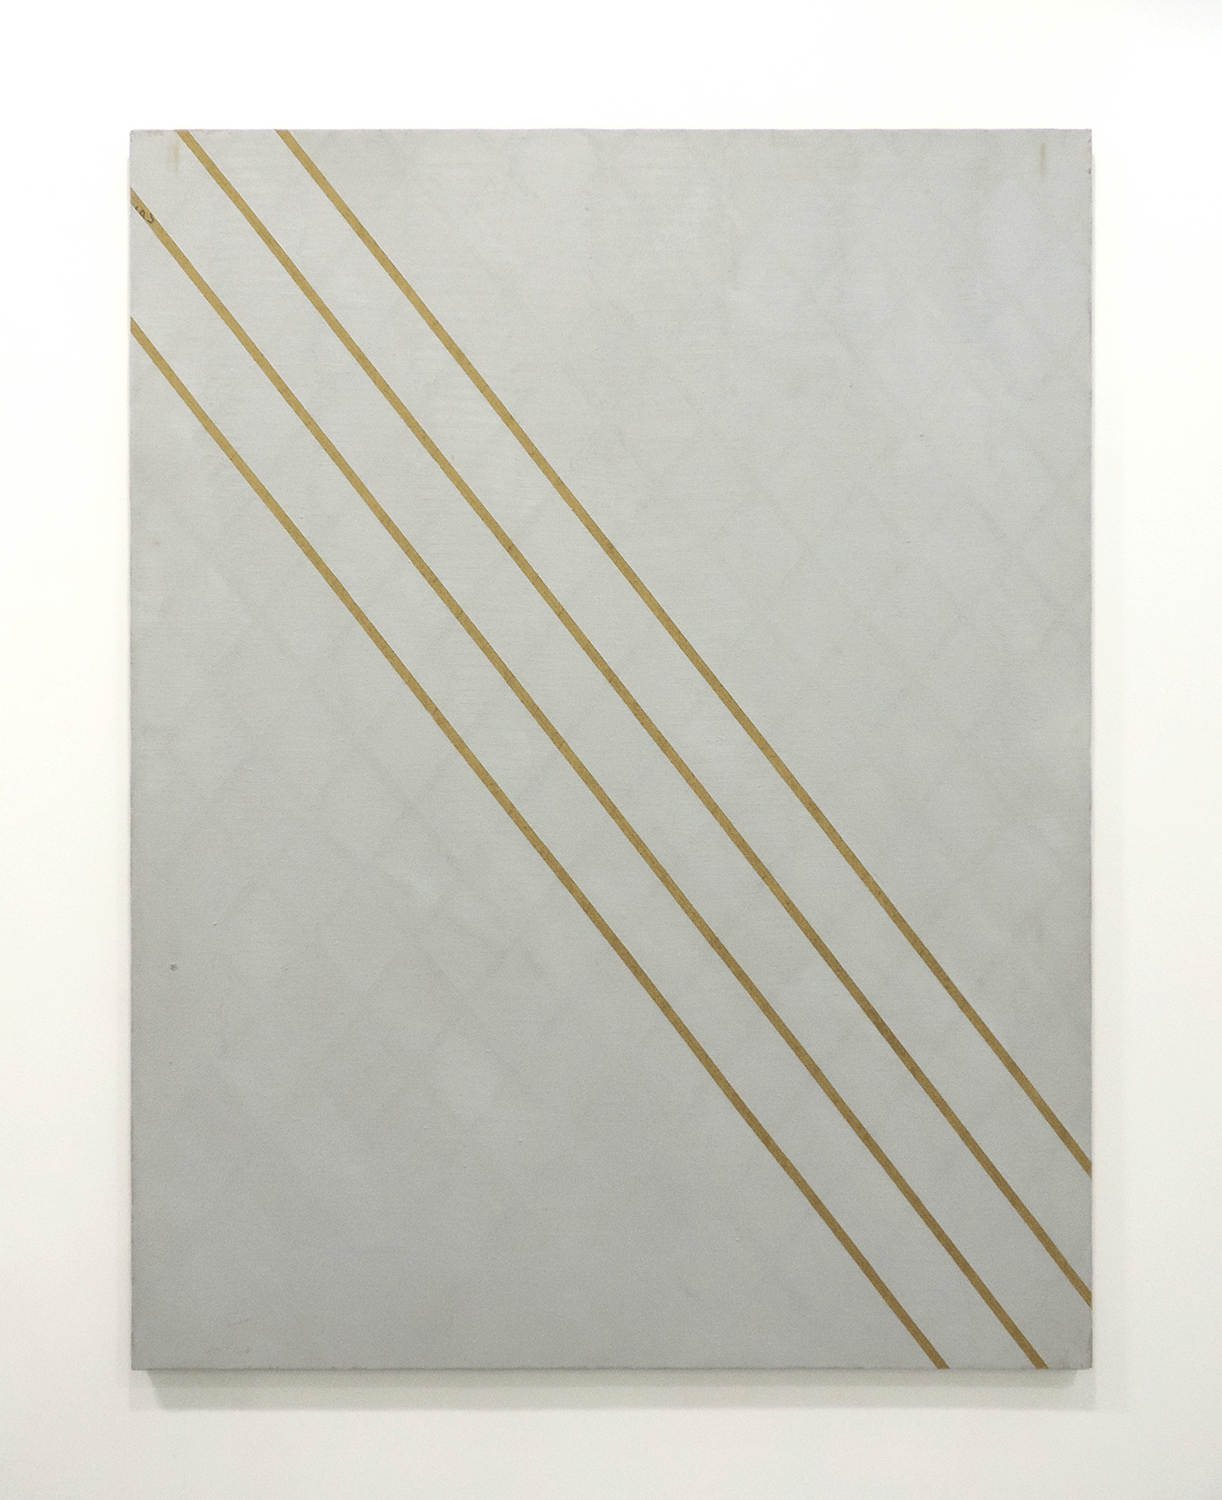 Untitled　/ Oil, pencil on Canvas,145 x 112.5 cm,1971